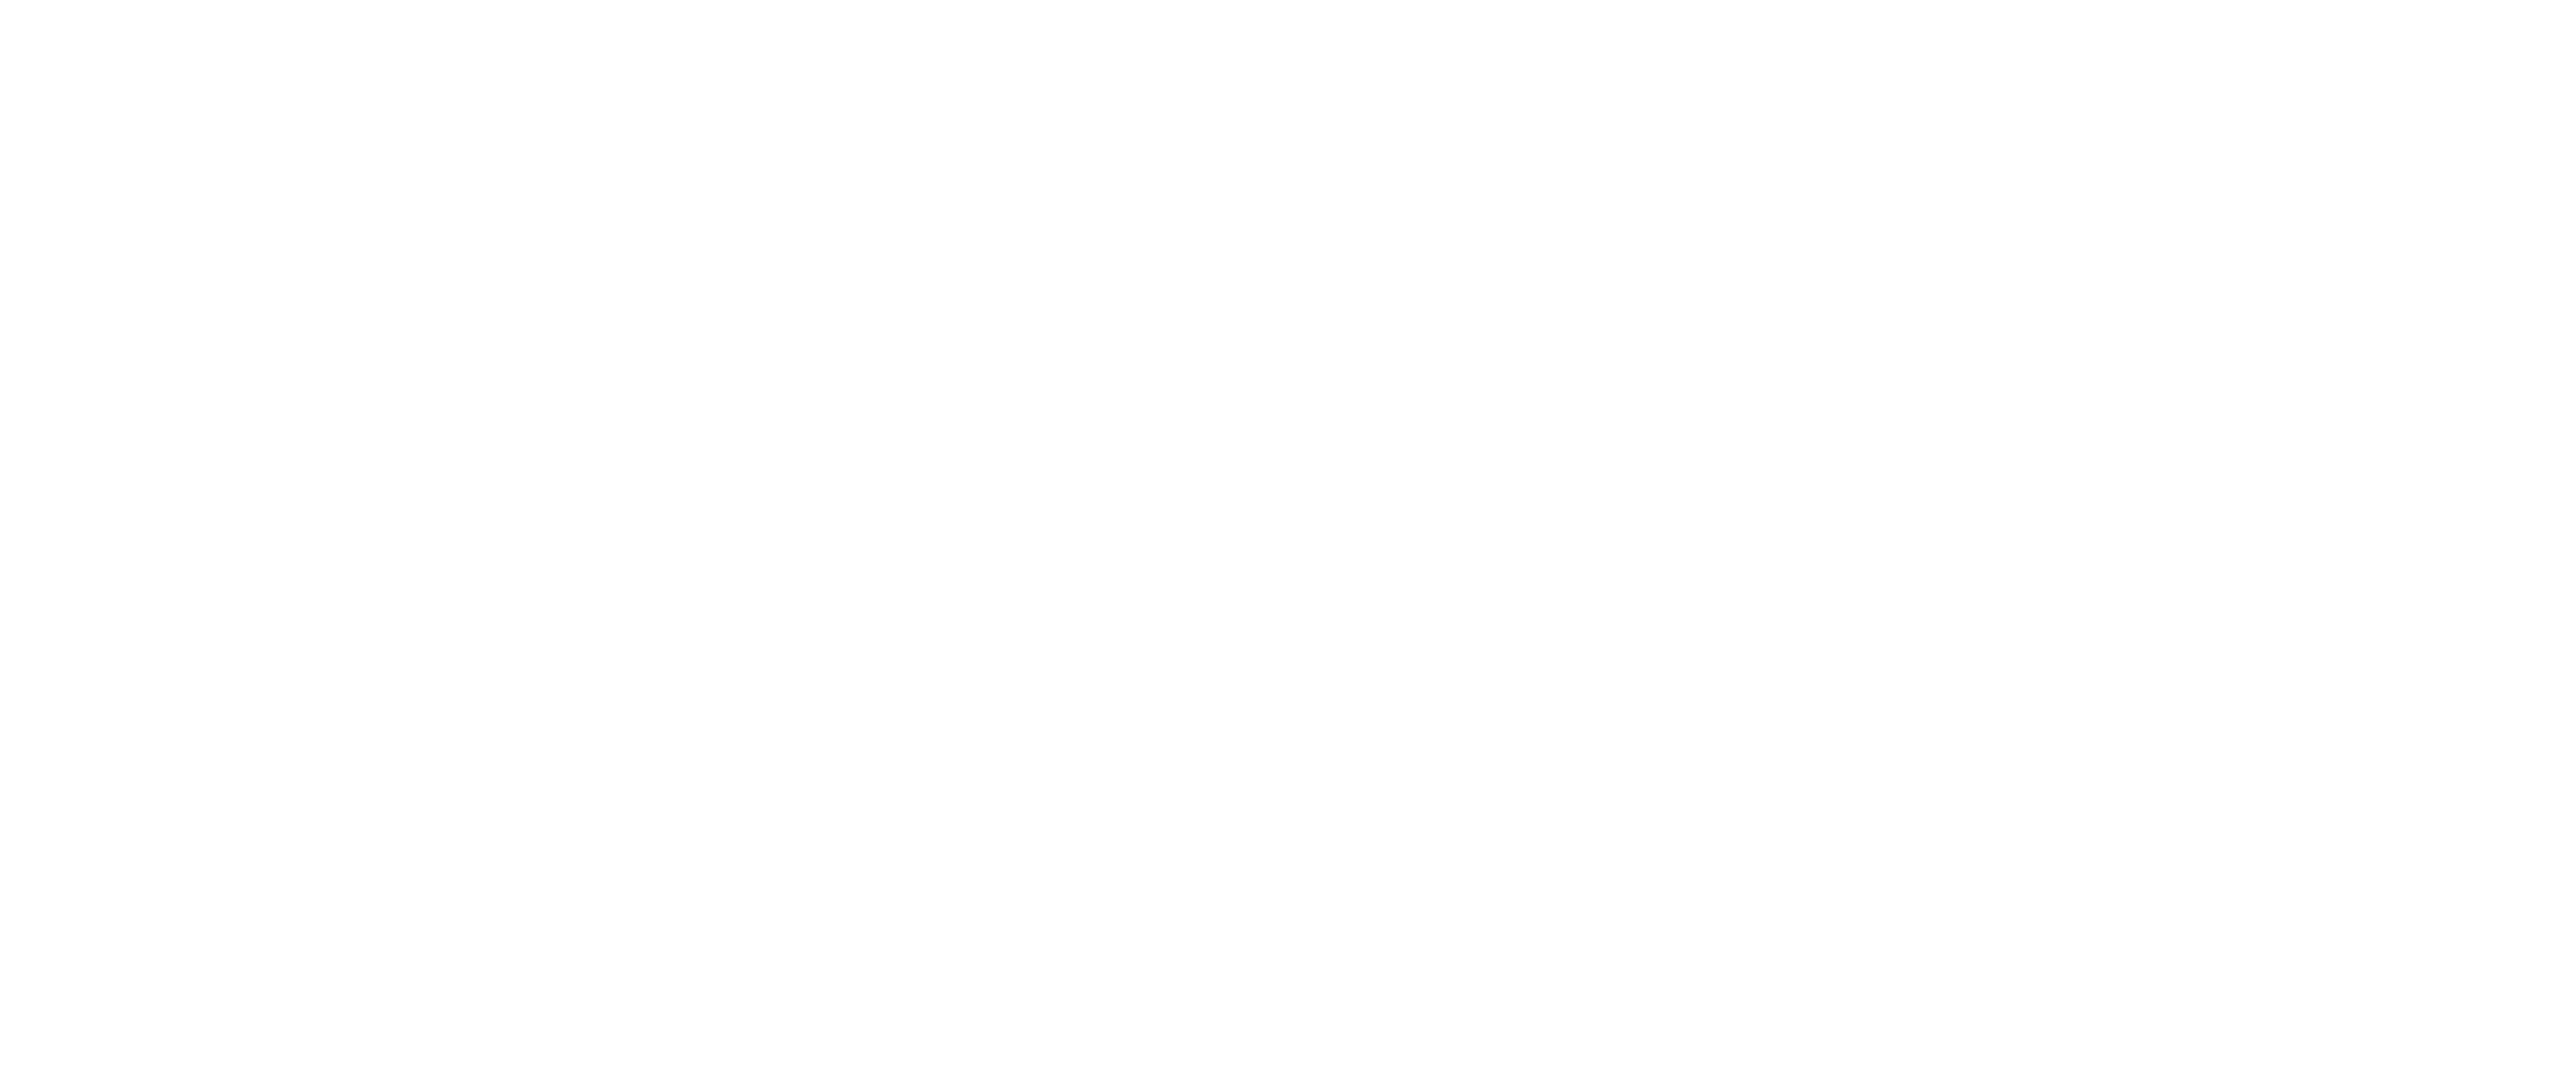 Access to everyone logo. Link to MCA Acessess and inclusion page.